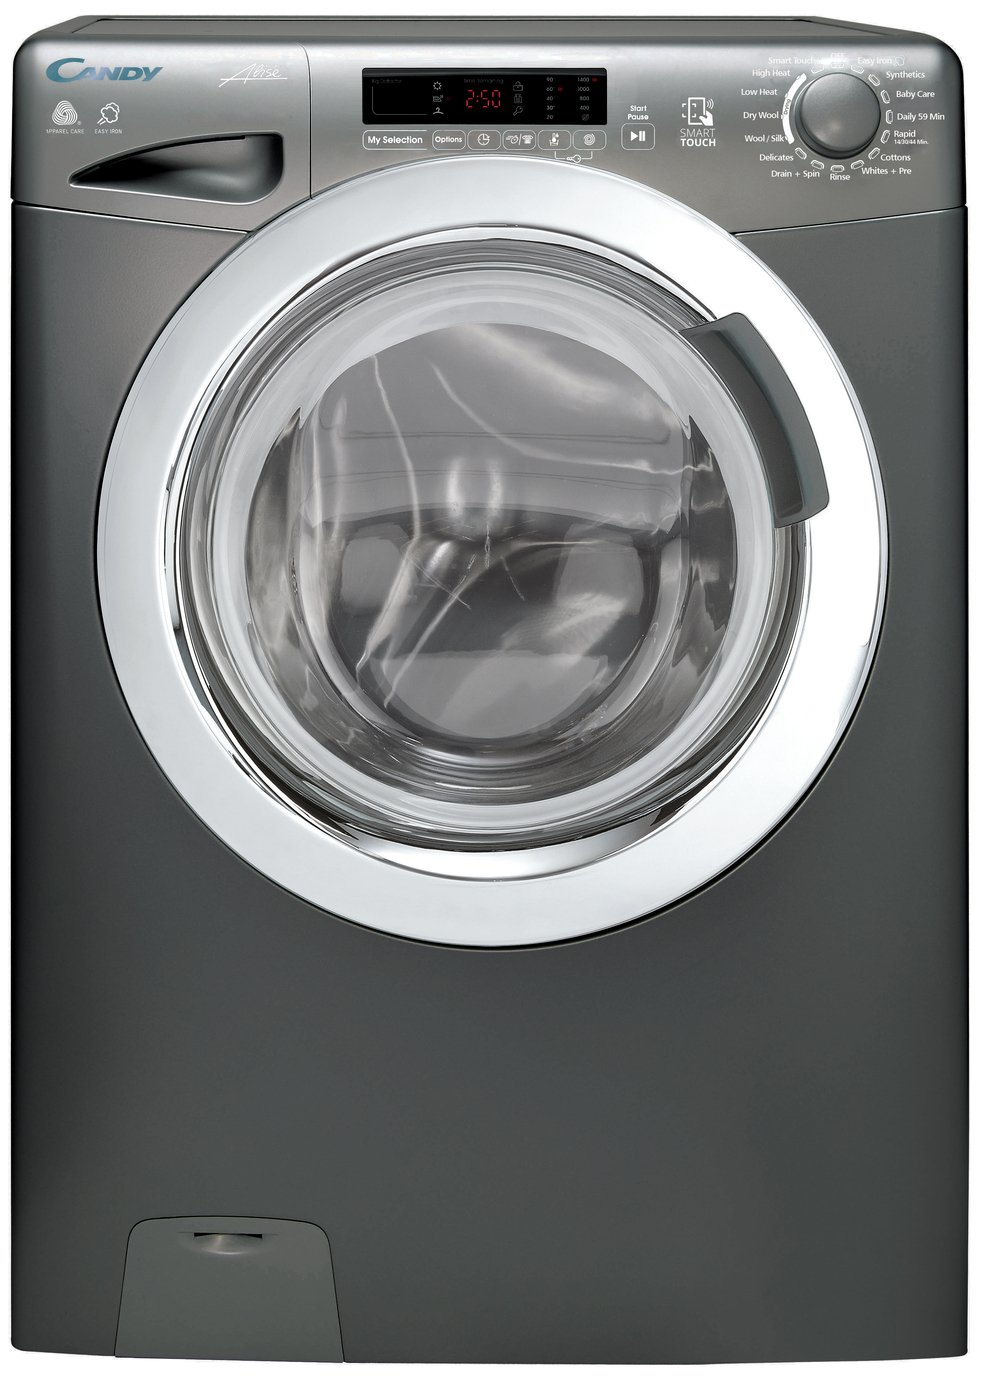 Candy GVSW485DCR 8 / 5KG 1400 Spin Washer Dryer - Graphite